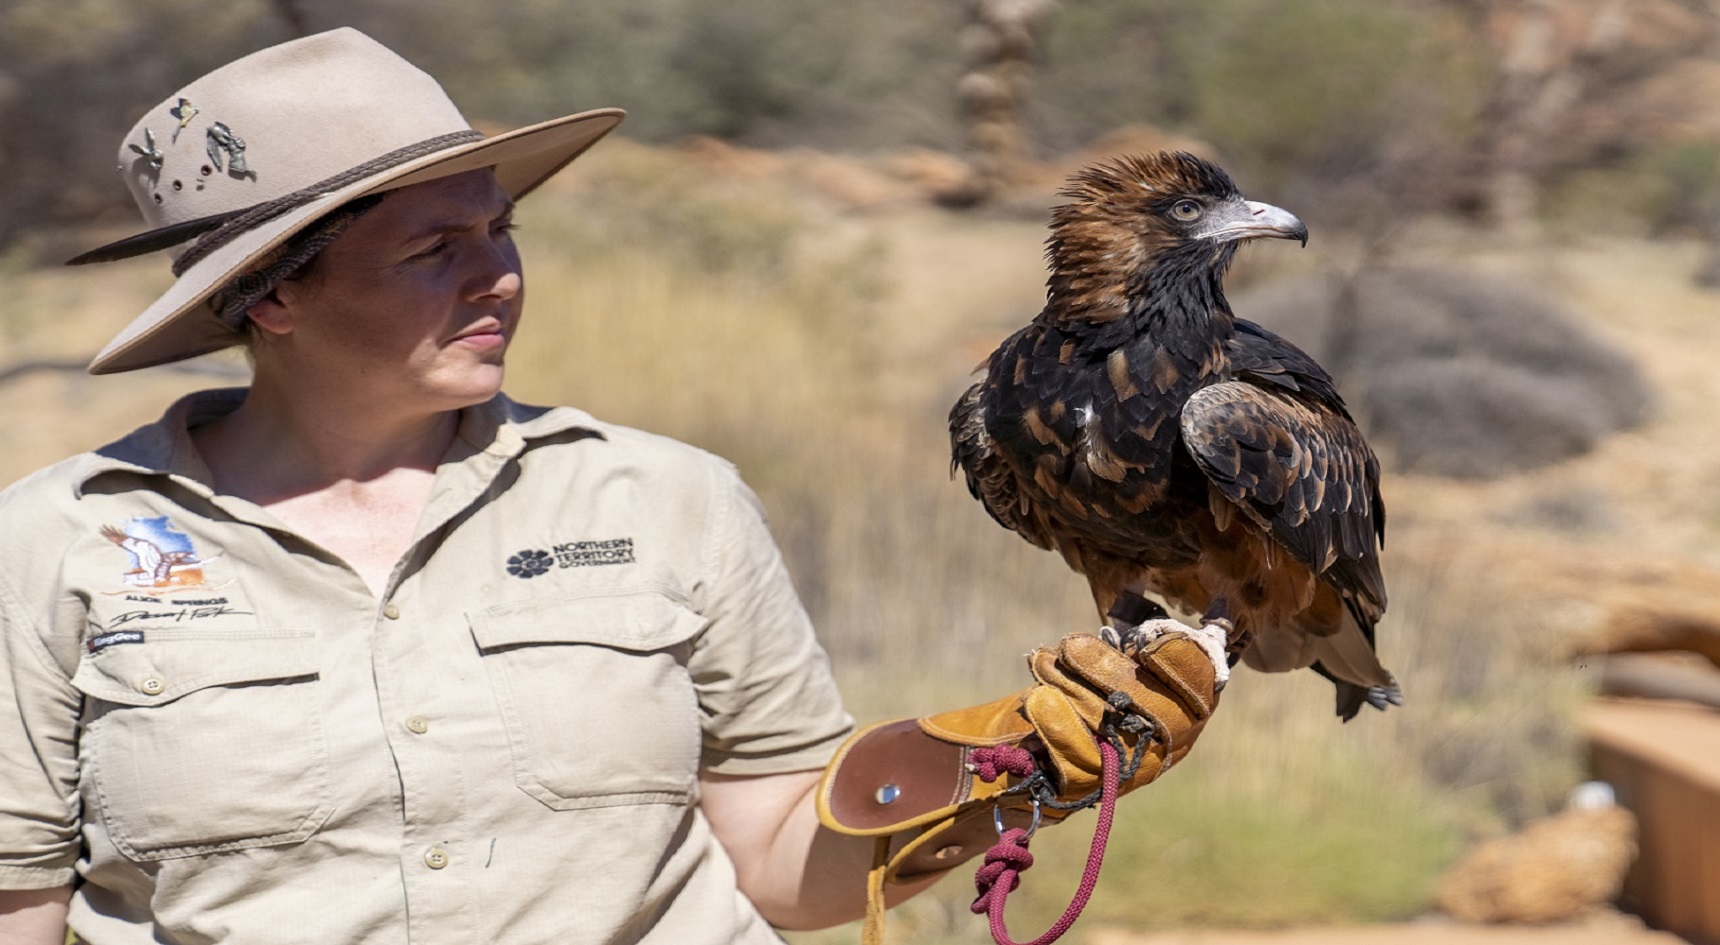 Ranger holding a wedge-tailed eagle.